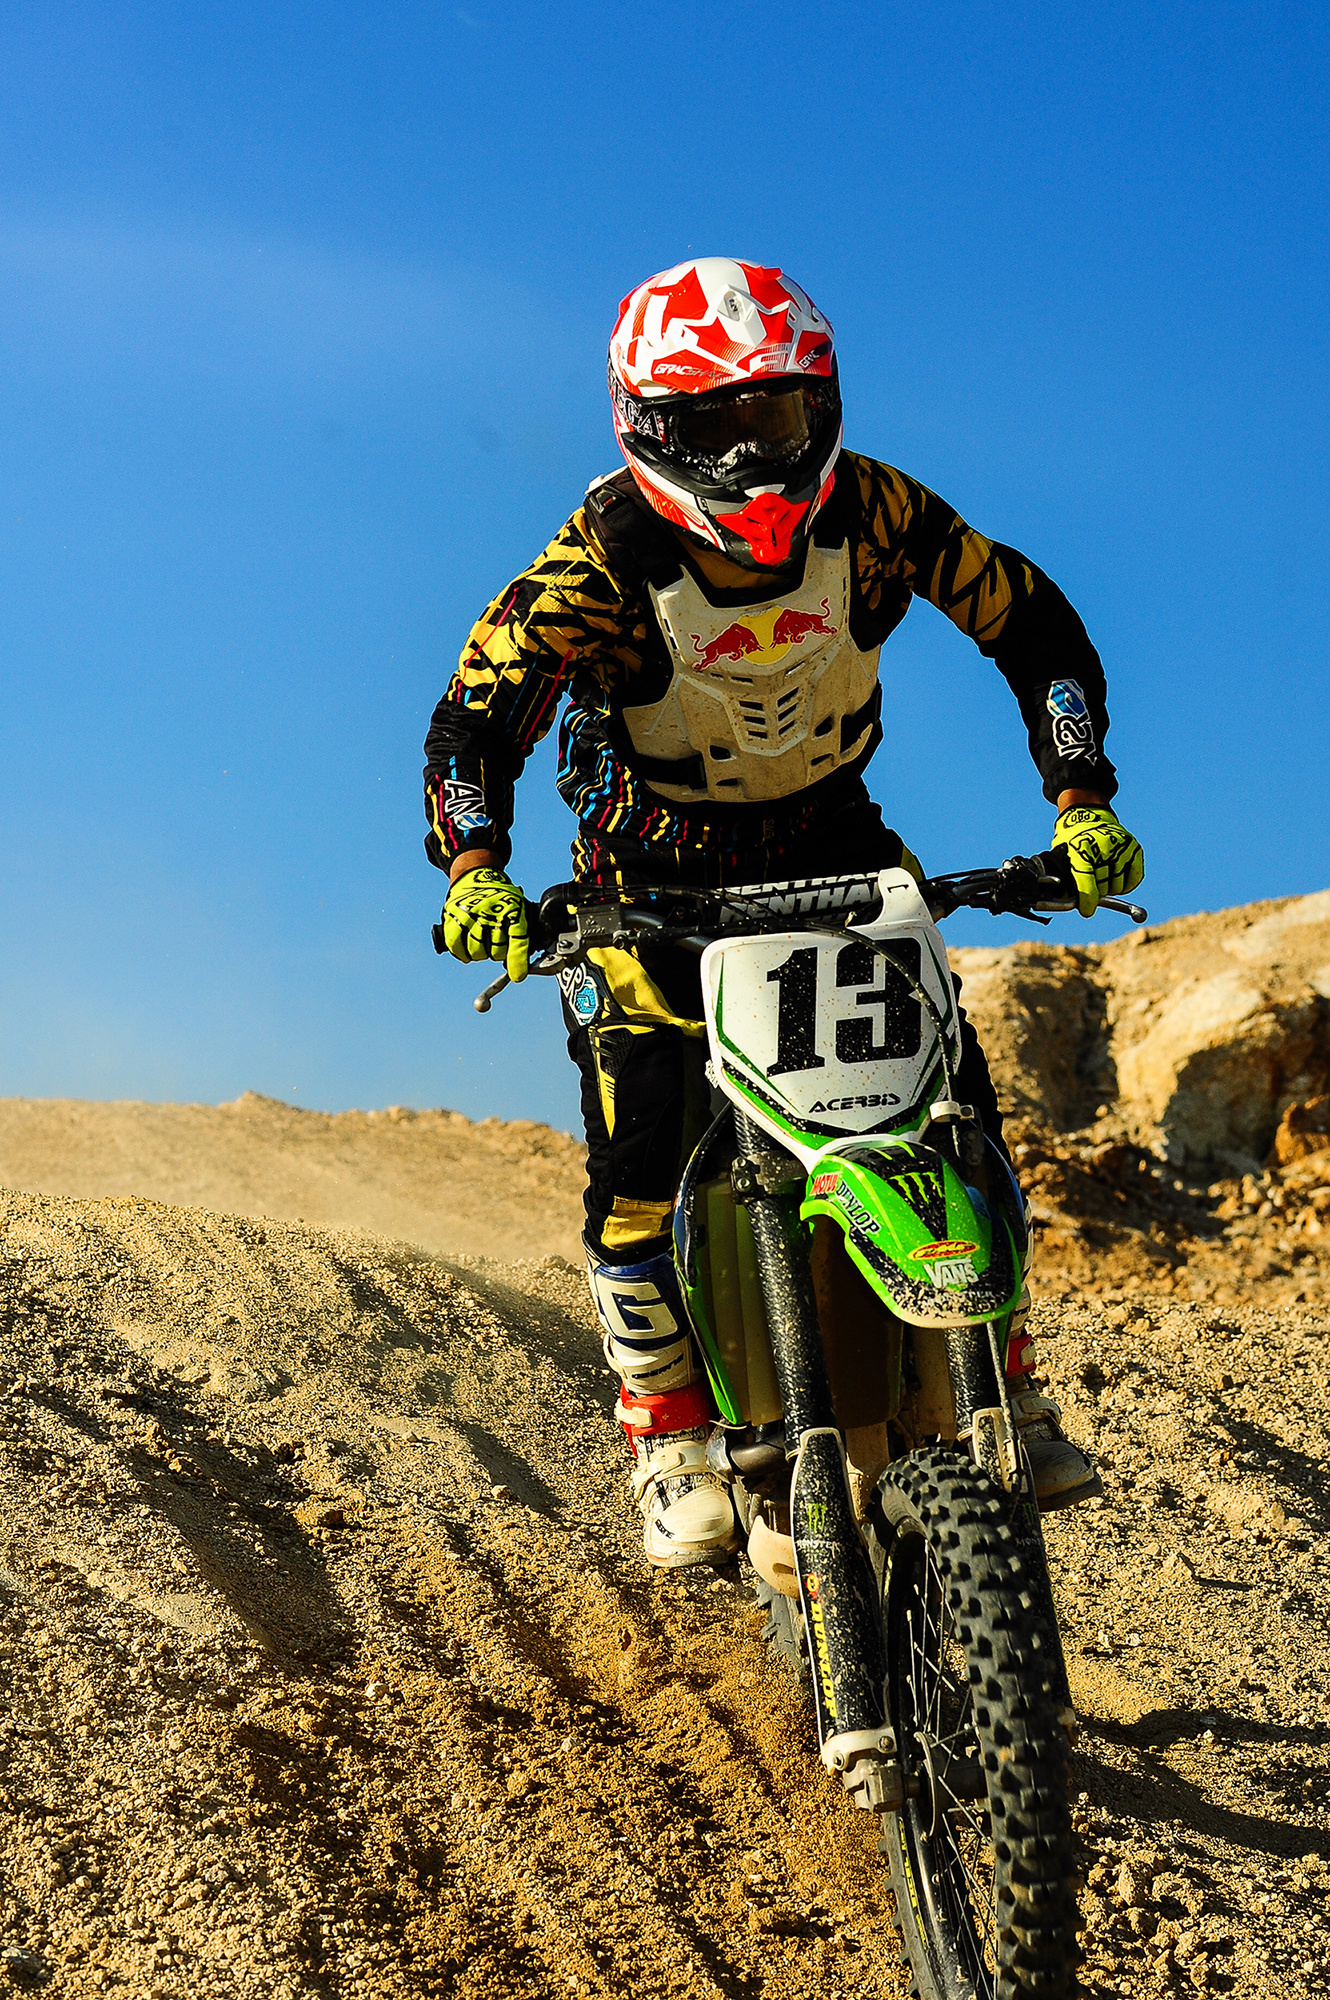 Motocross: Riding The Desert, Goggles Protect Riders' Eyes From Sand, Auto, Moto. 1330x2000 HD Wallpaper.